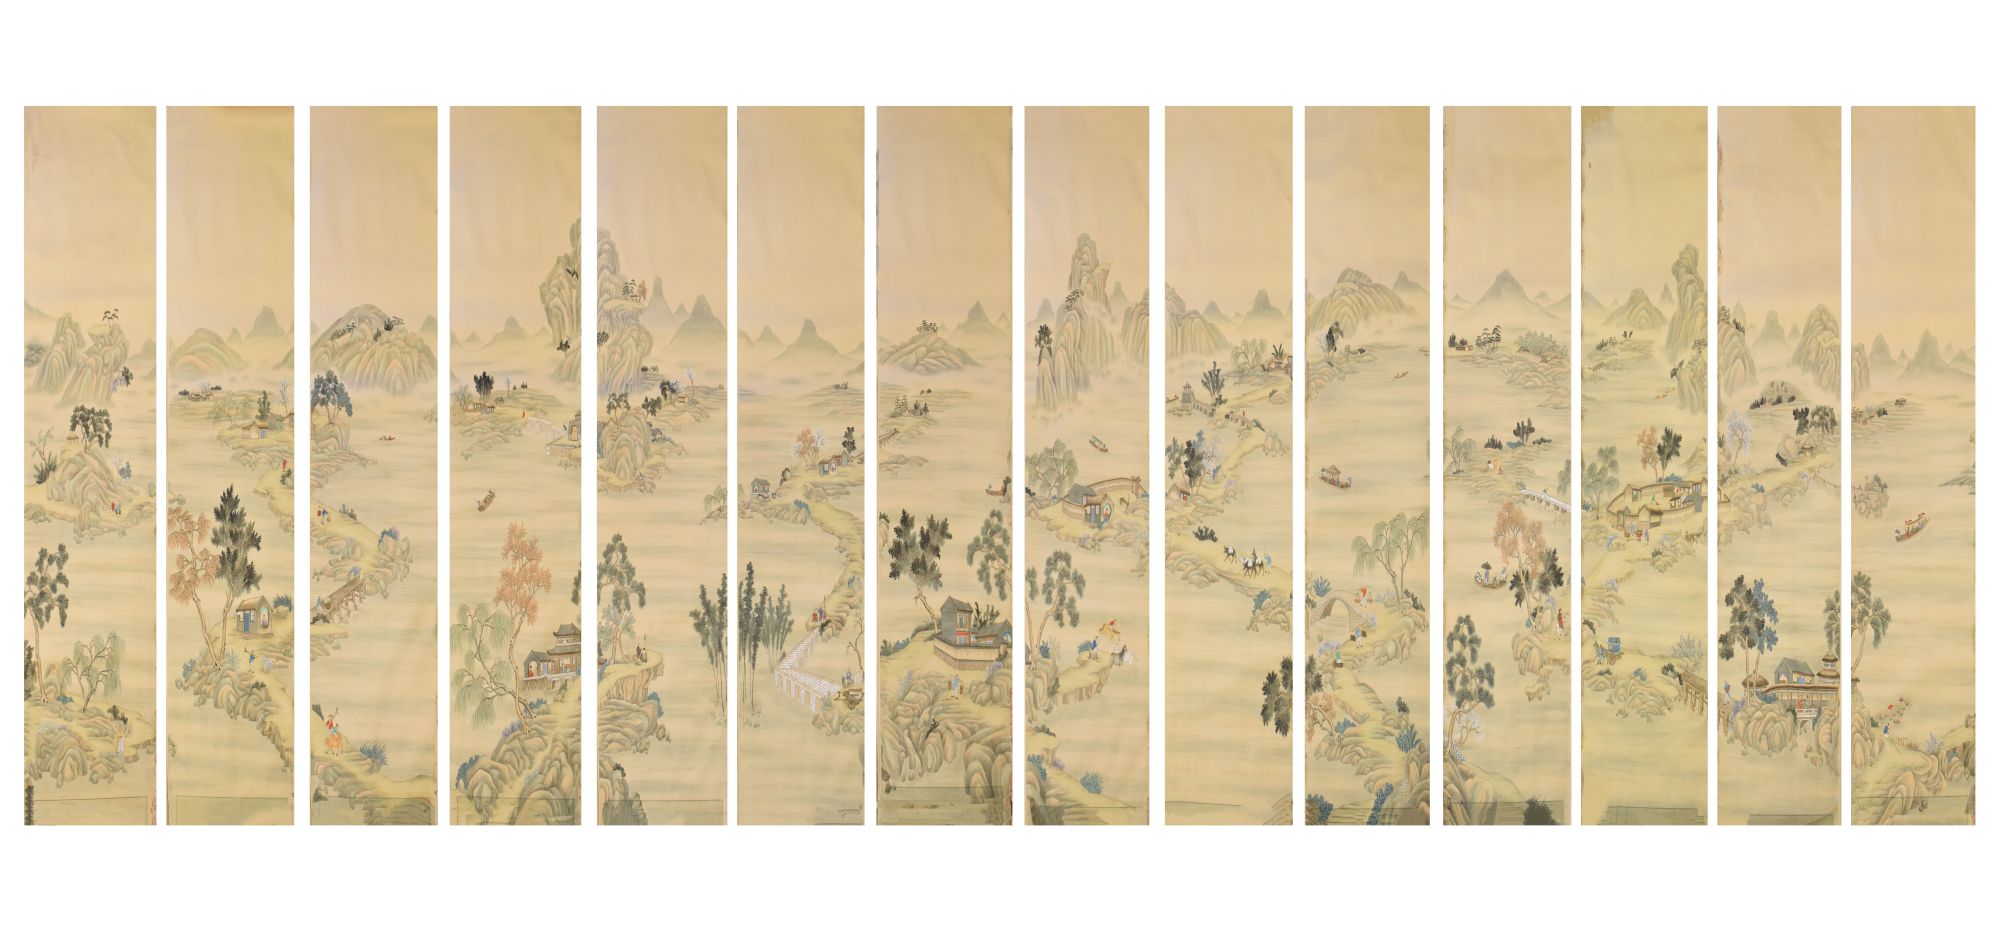 Fourteen rolls of 20th Century Chinese watercolour wallpaper Sold for £7,200